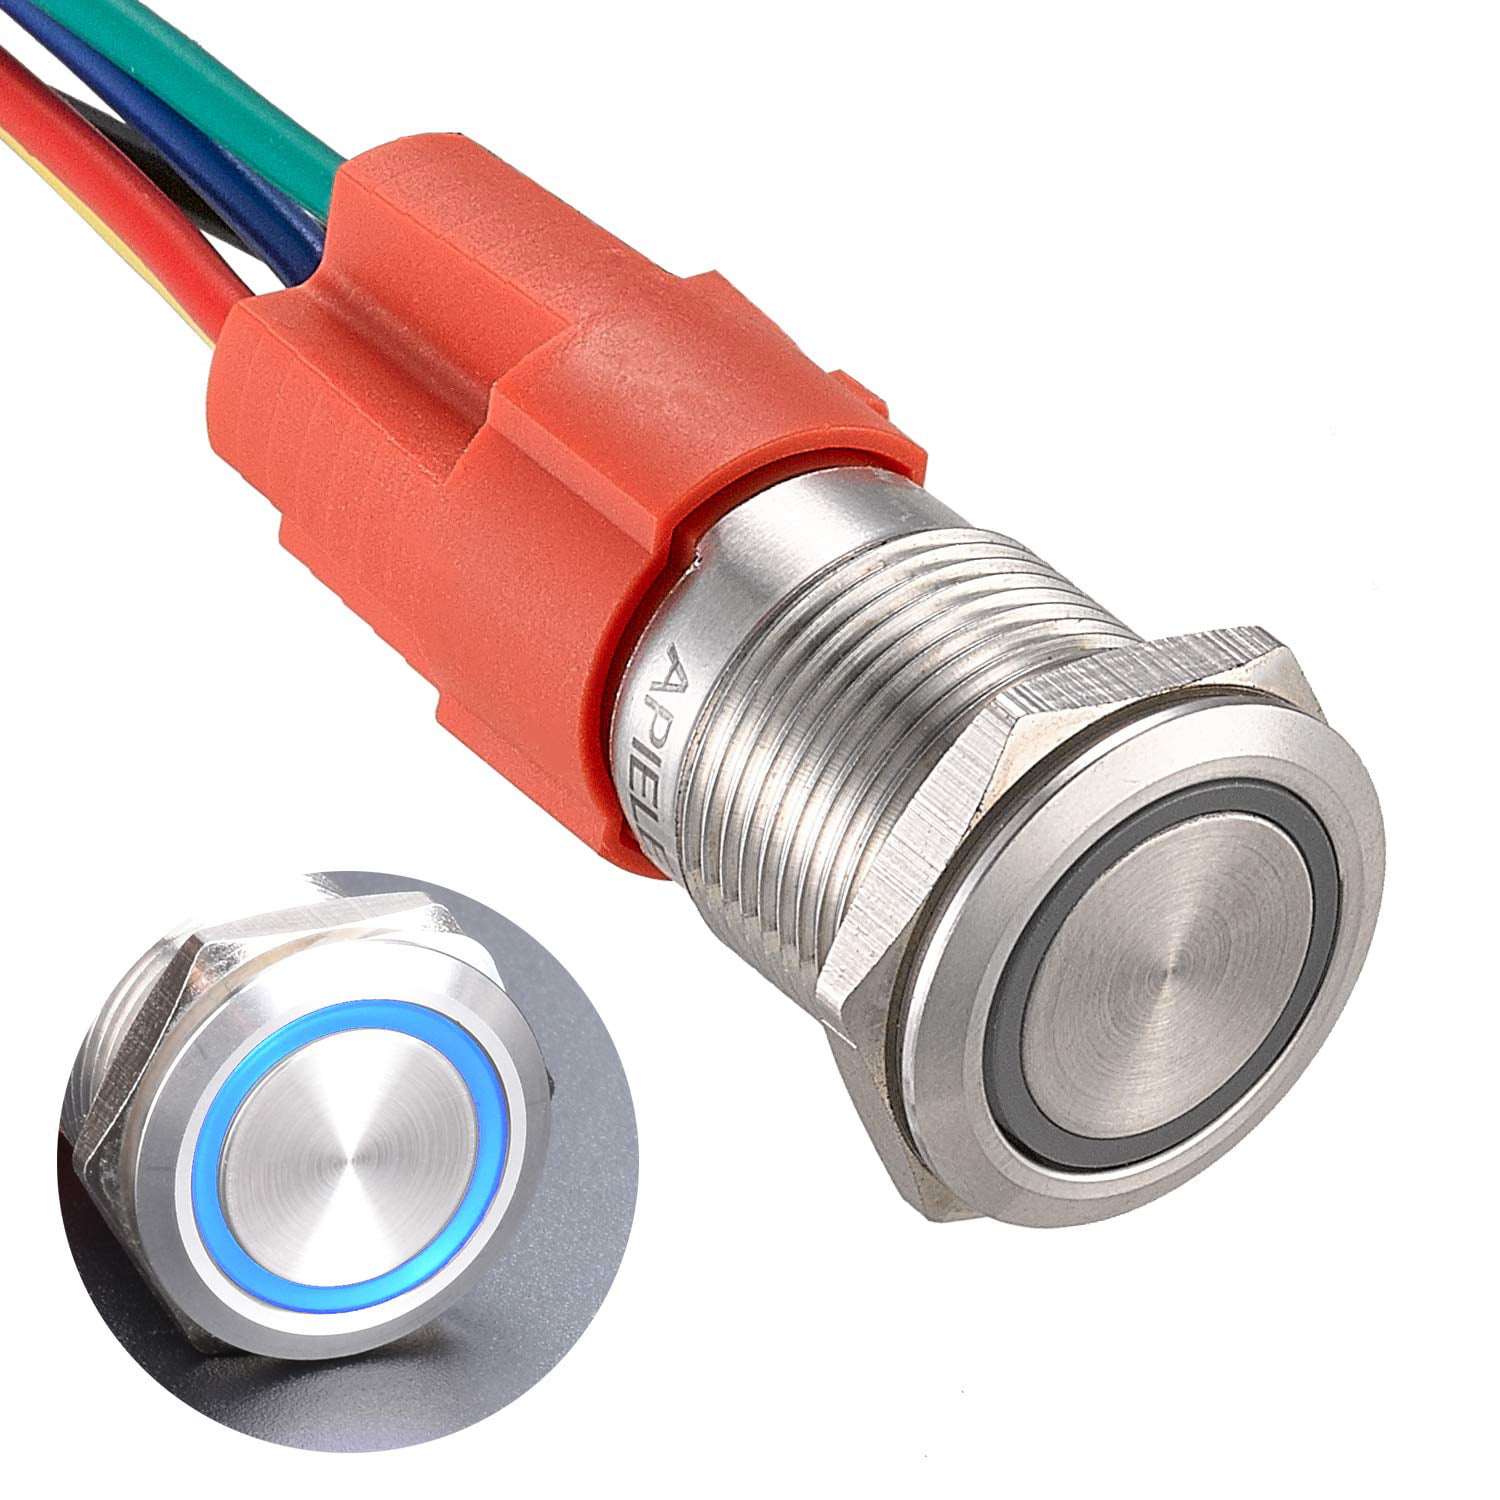 Details about   16mm Car LED Light Self-locking Latching Push Button Switch Waterproof US 